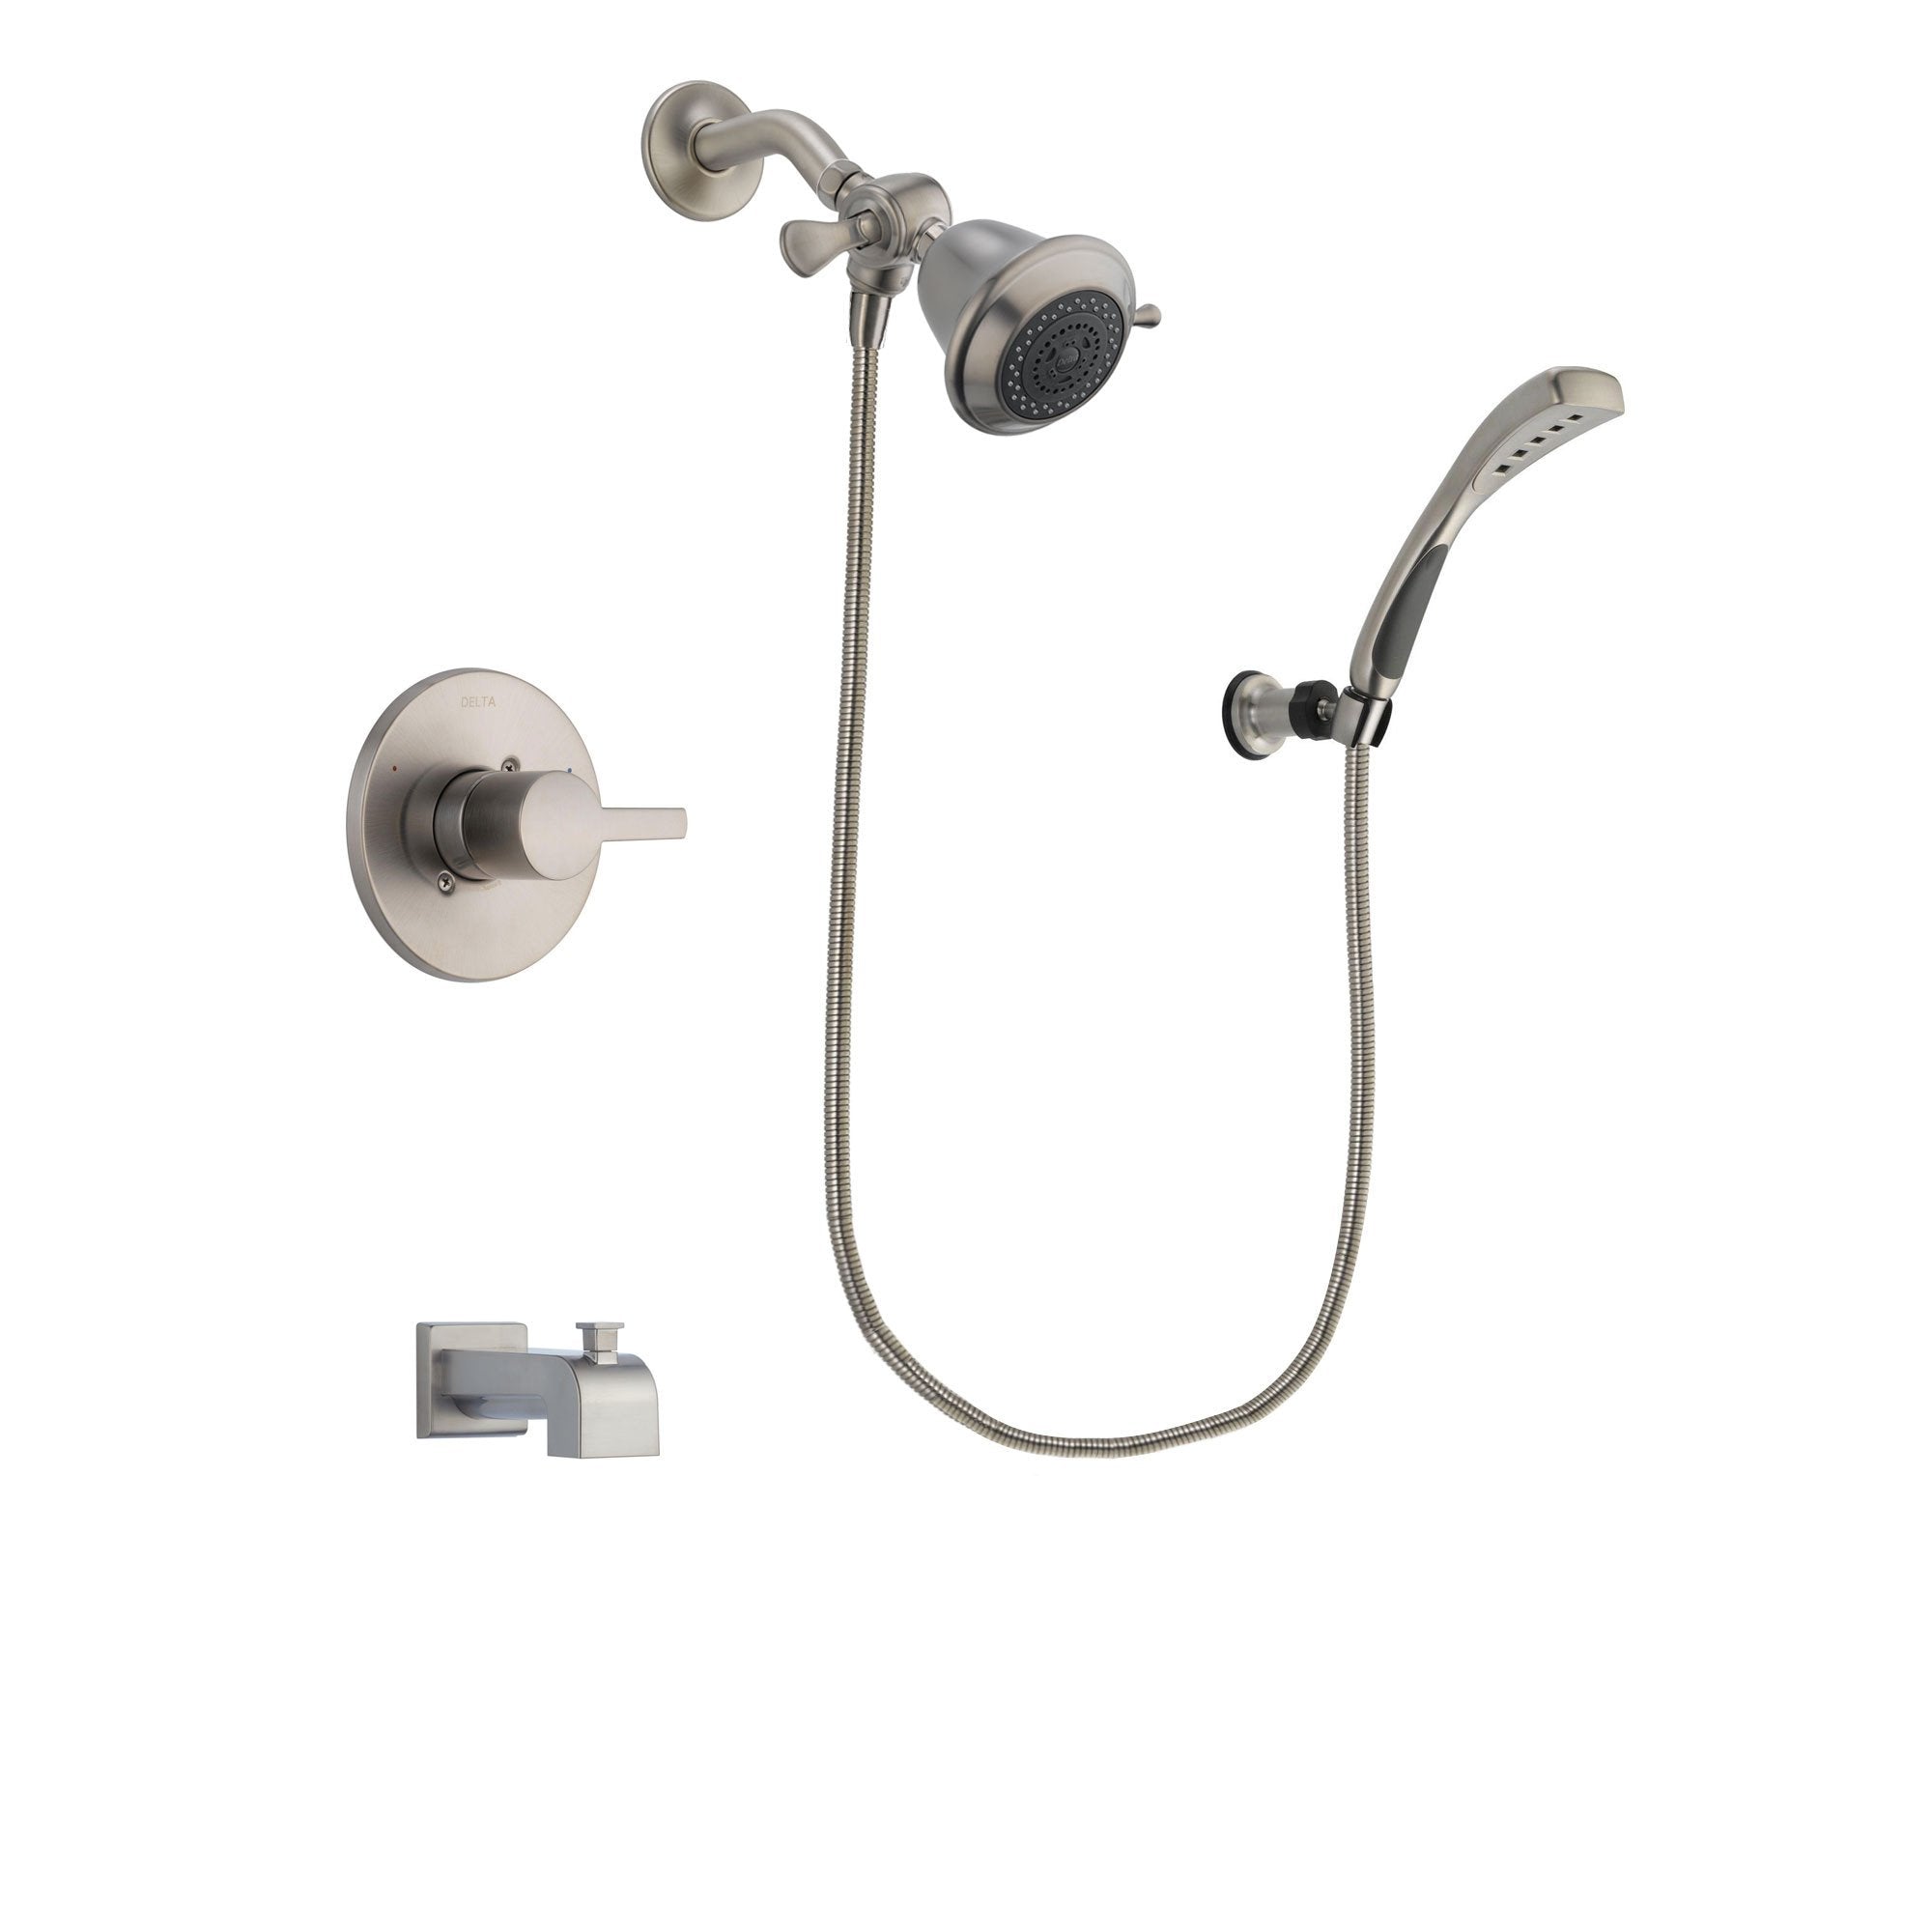 Delta Compel Stainless Steel Finish Tub and Shower Faucet System Package with Shower Head and Wall Mounted Handshower Includes Rough-in Valve and Tub Spout DSP1799V